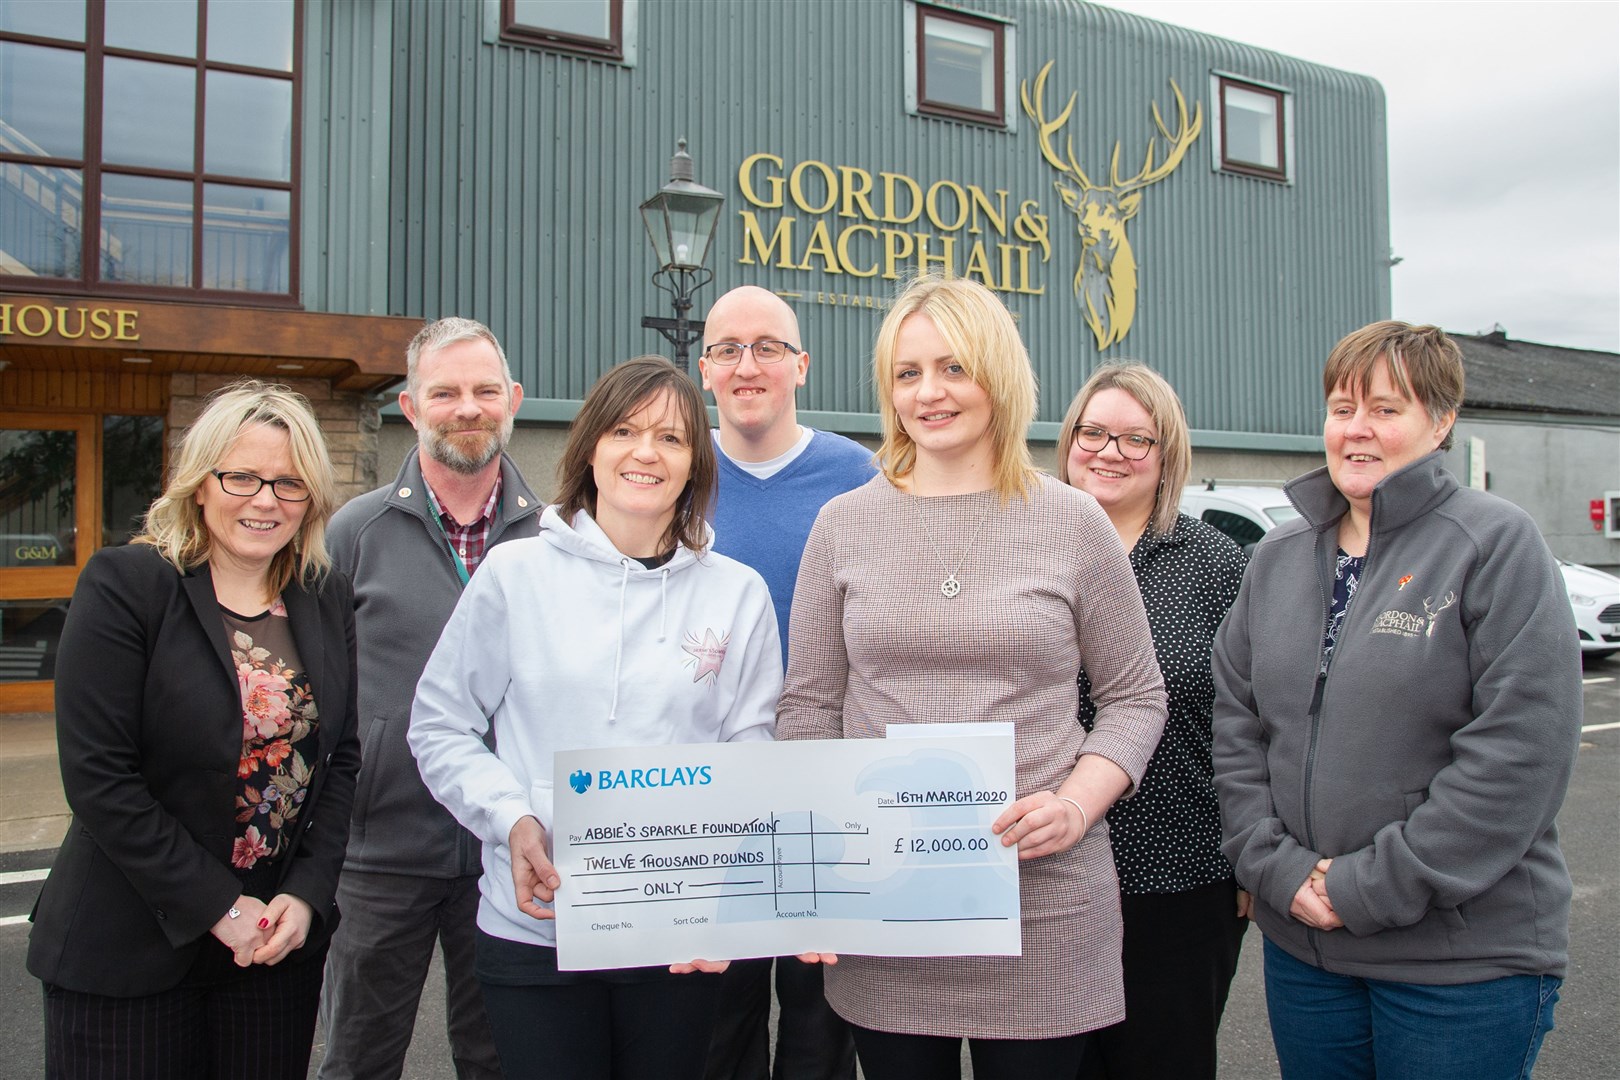 Jodie Clayton, HR generalist at Gordon & MacPhail, hands over a cheque for £12,000 to Tammy Main, of Abbie's Sparkle Foundation, surrounded by staff. Picture: Daniel Forsyth.